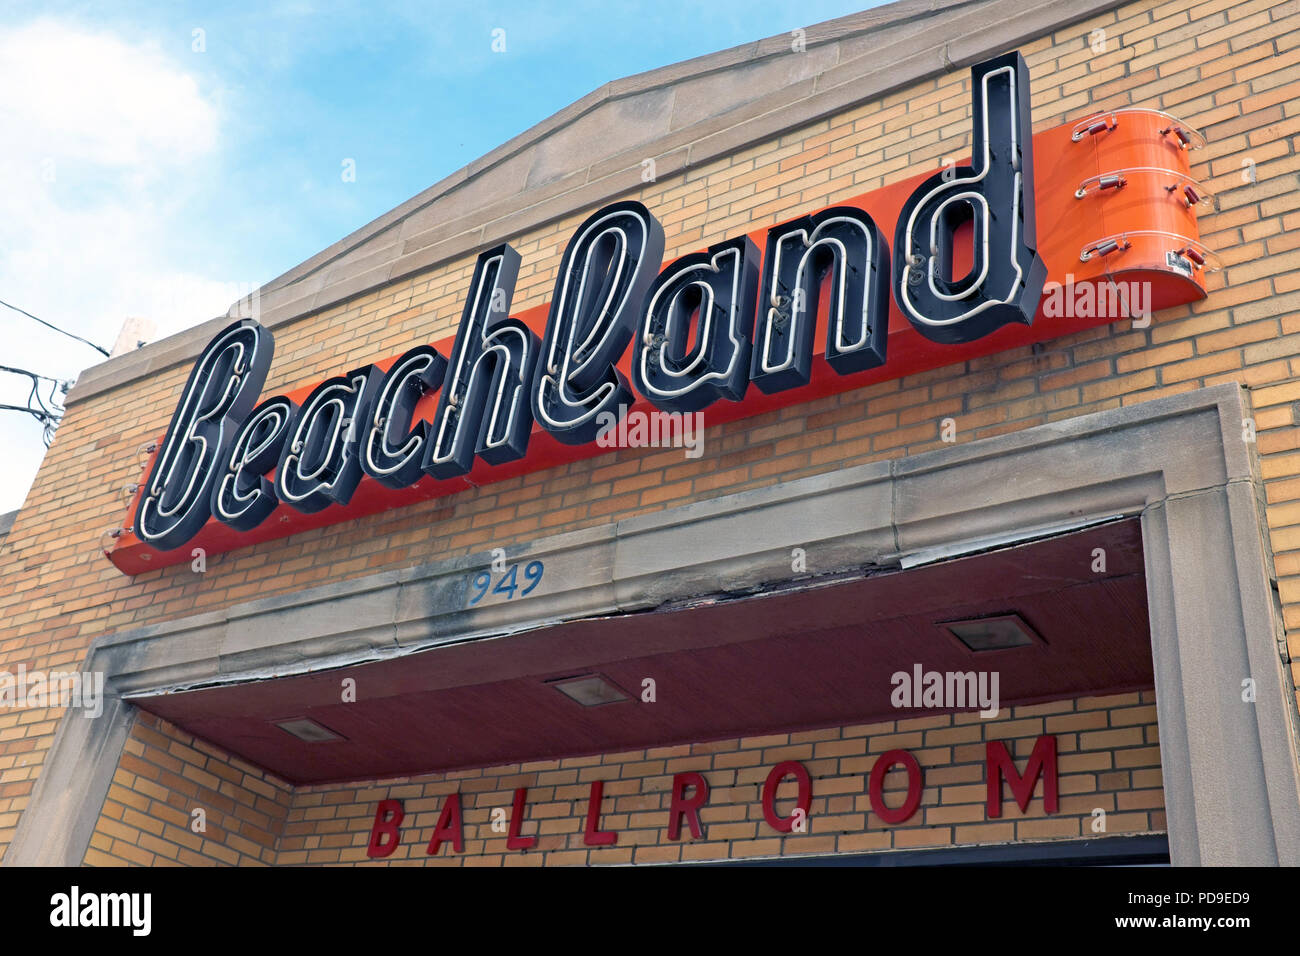 The Beachland Ballroom neon sign above the main entrance in the Waterloo Arts District in Cleveland, Ohio, USA. Stock Photo